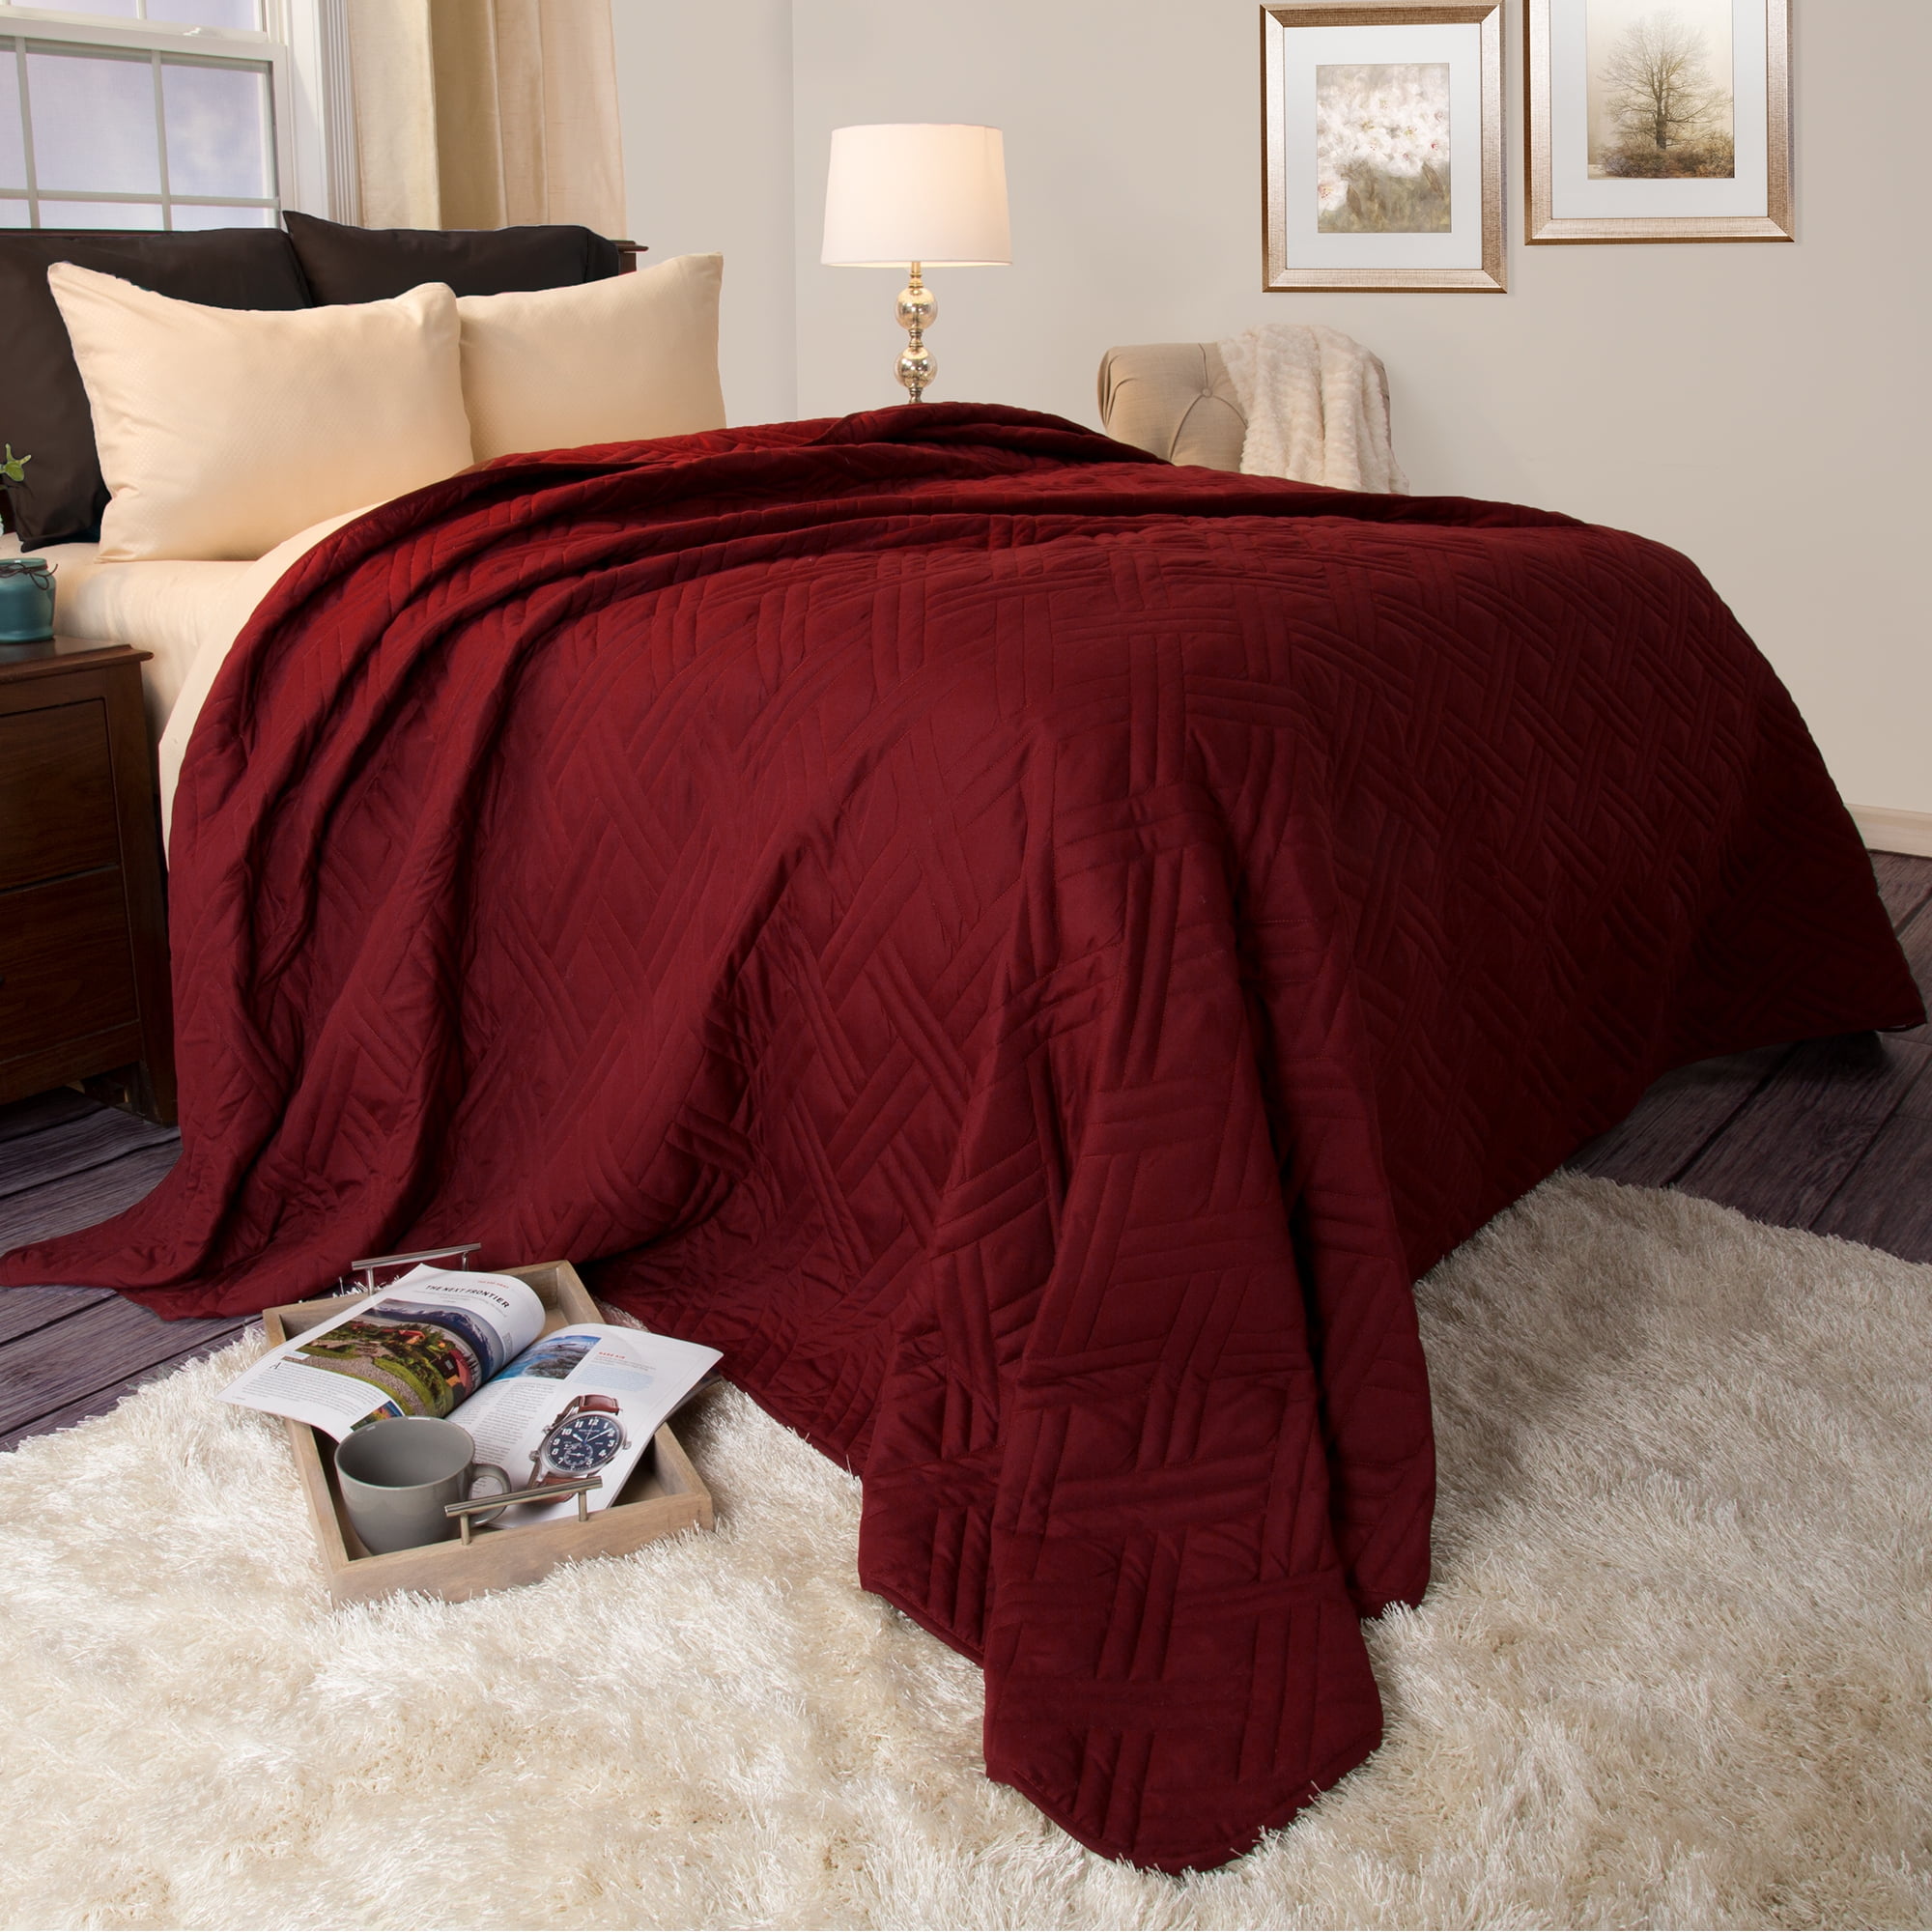 Details about   Throw Blanket Winter Warm Bed Cover Hair Flannel Fleece Home Bedspread Christmas 